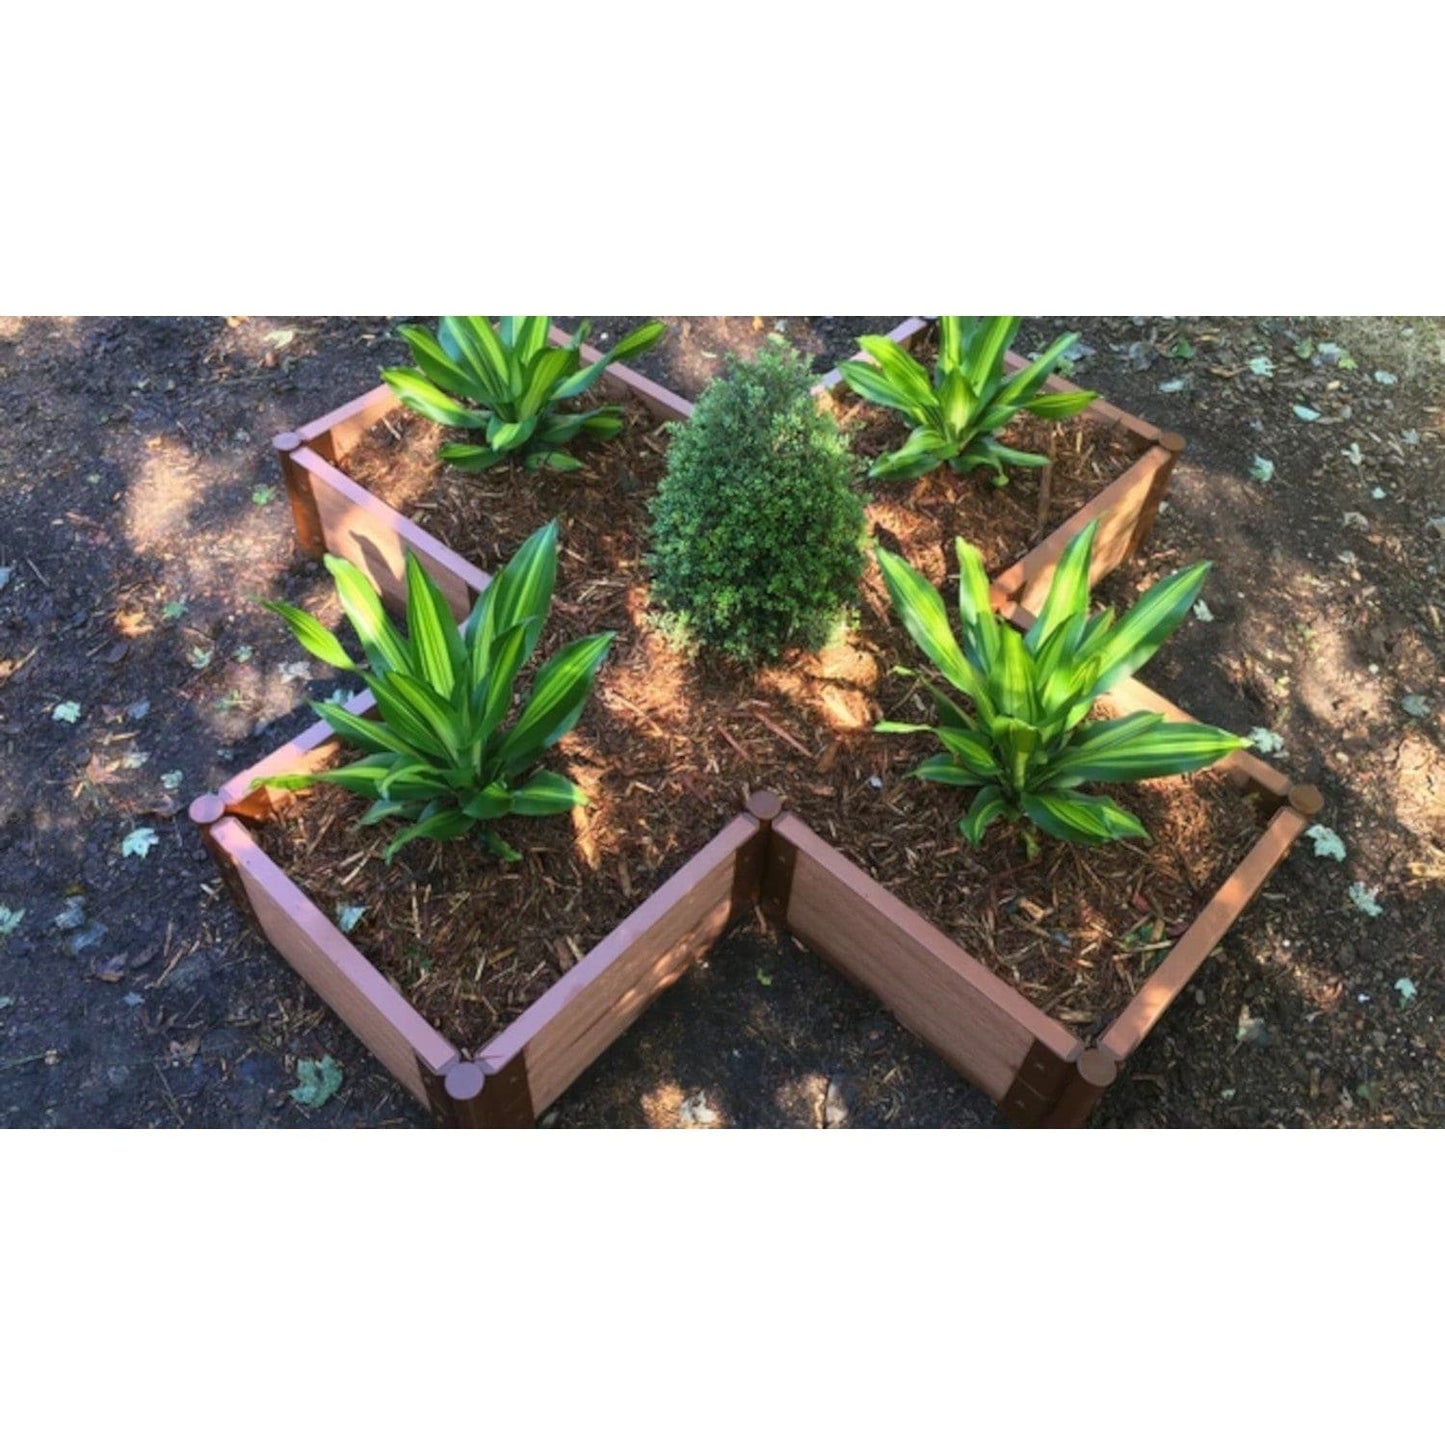 Frame It All Gardening Accessories Frame It All | Tool-Free Military Medallion Raised Garden Bed (Kit Cross) 6' X 6' X 5.5" - Classic Sienna - 1" Profile 200001484